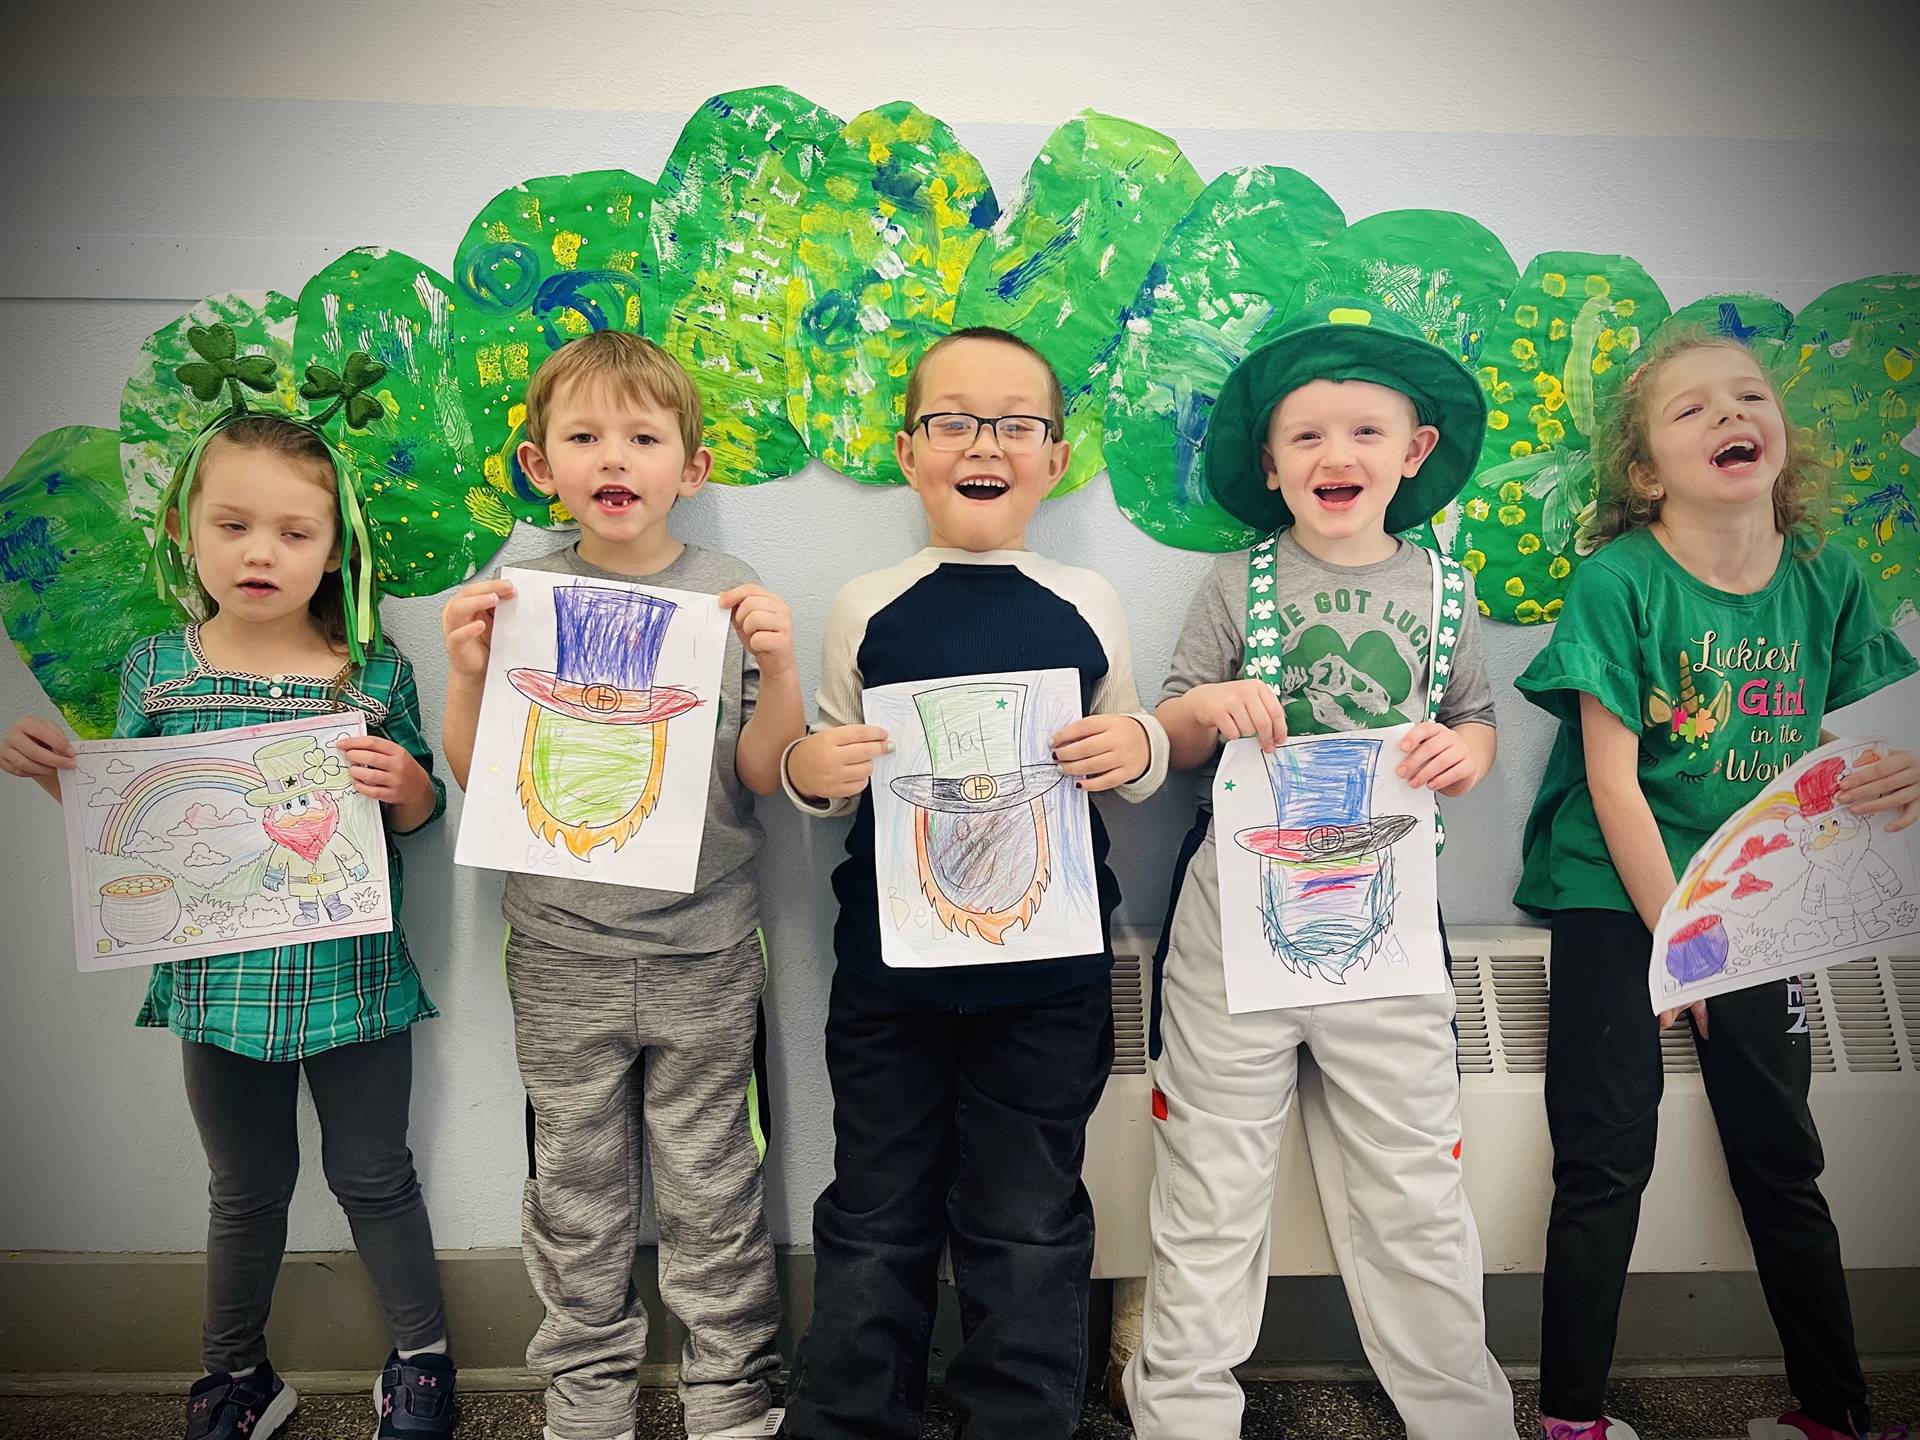 5 students hold leprechaun faces colored against a background of a giant green caterpillar